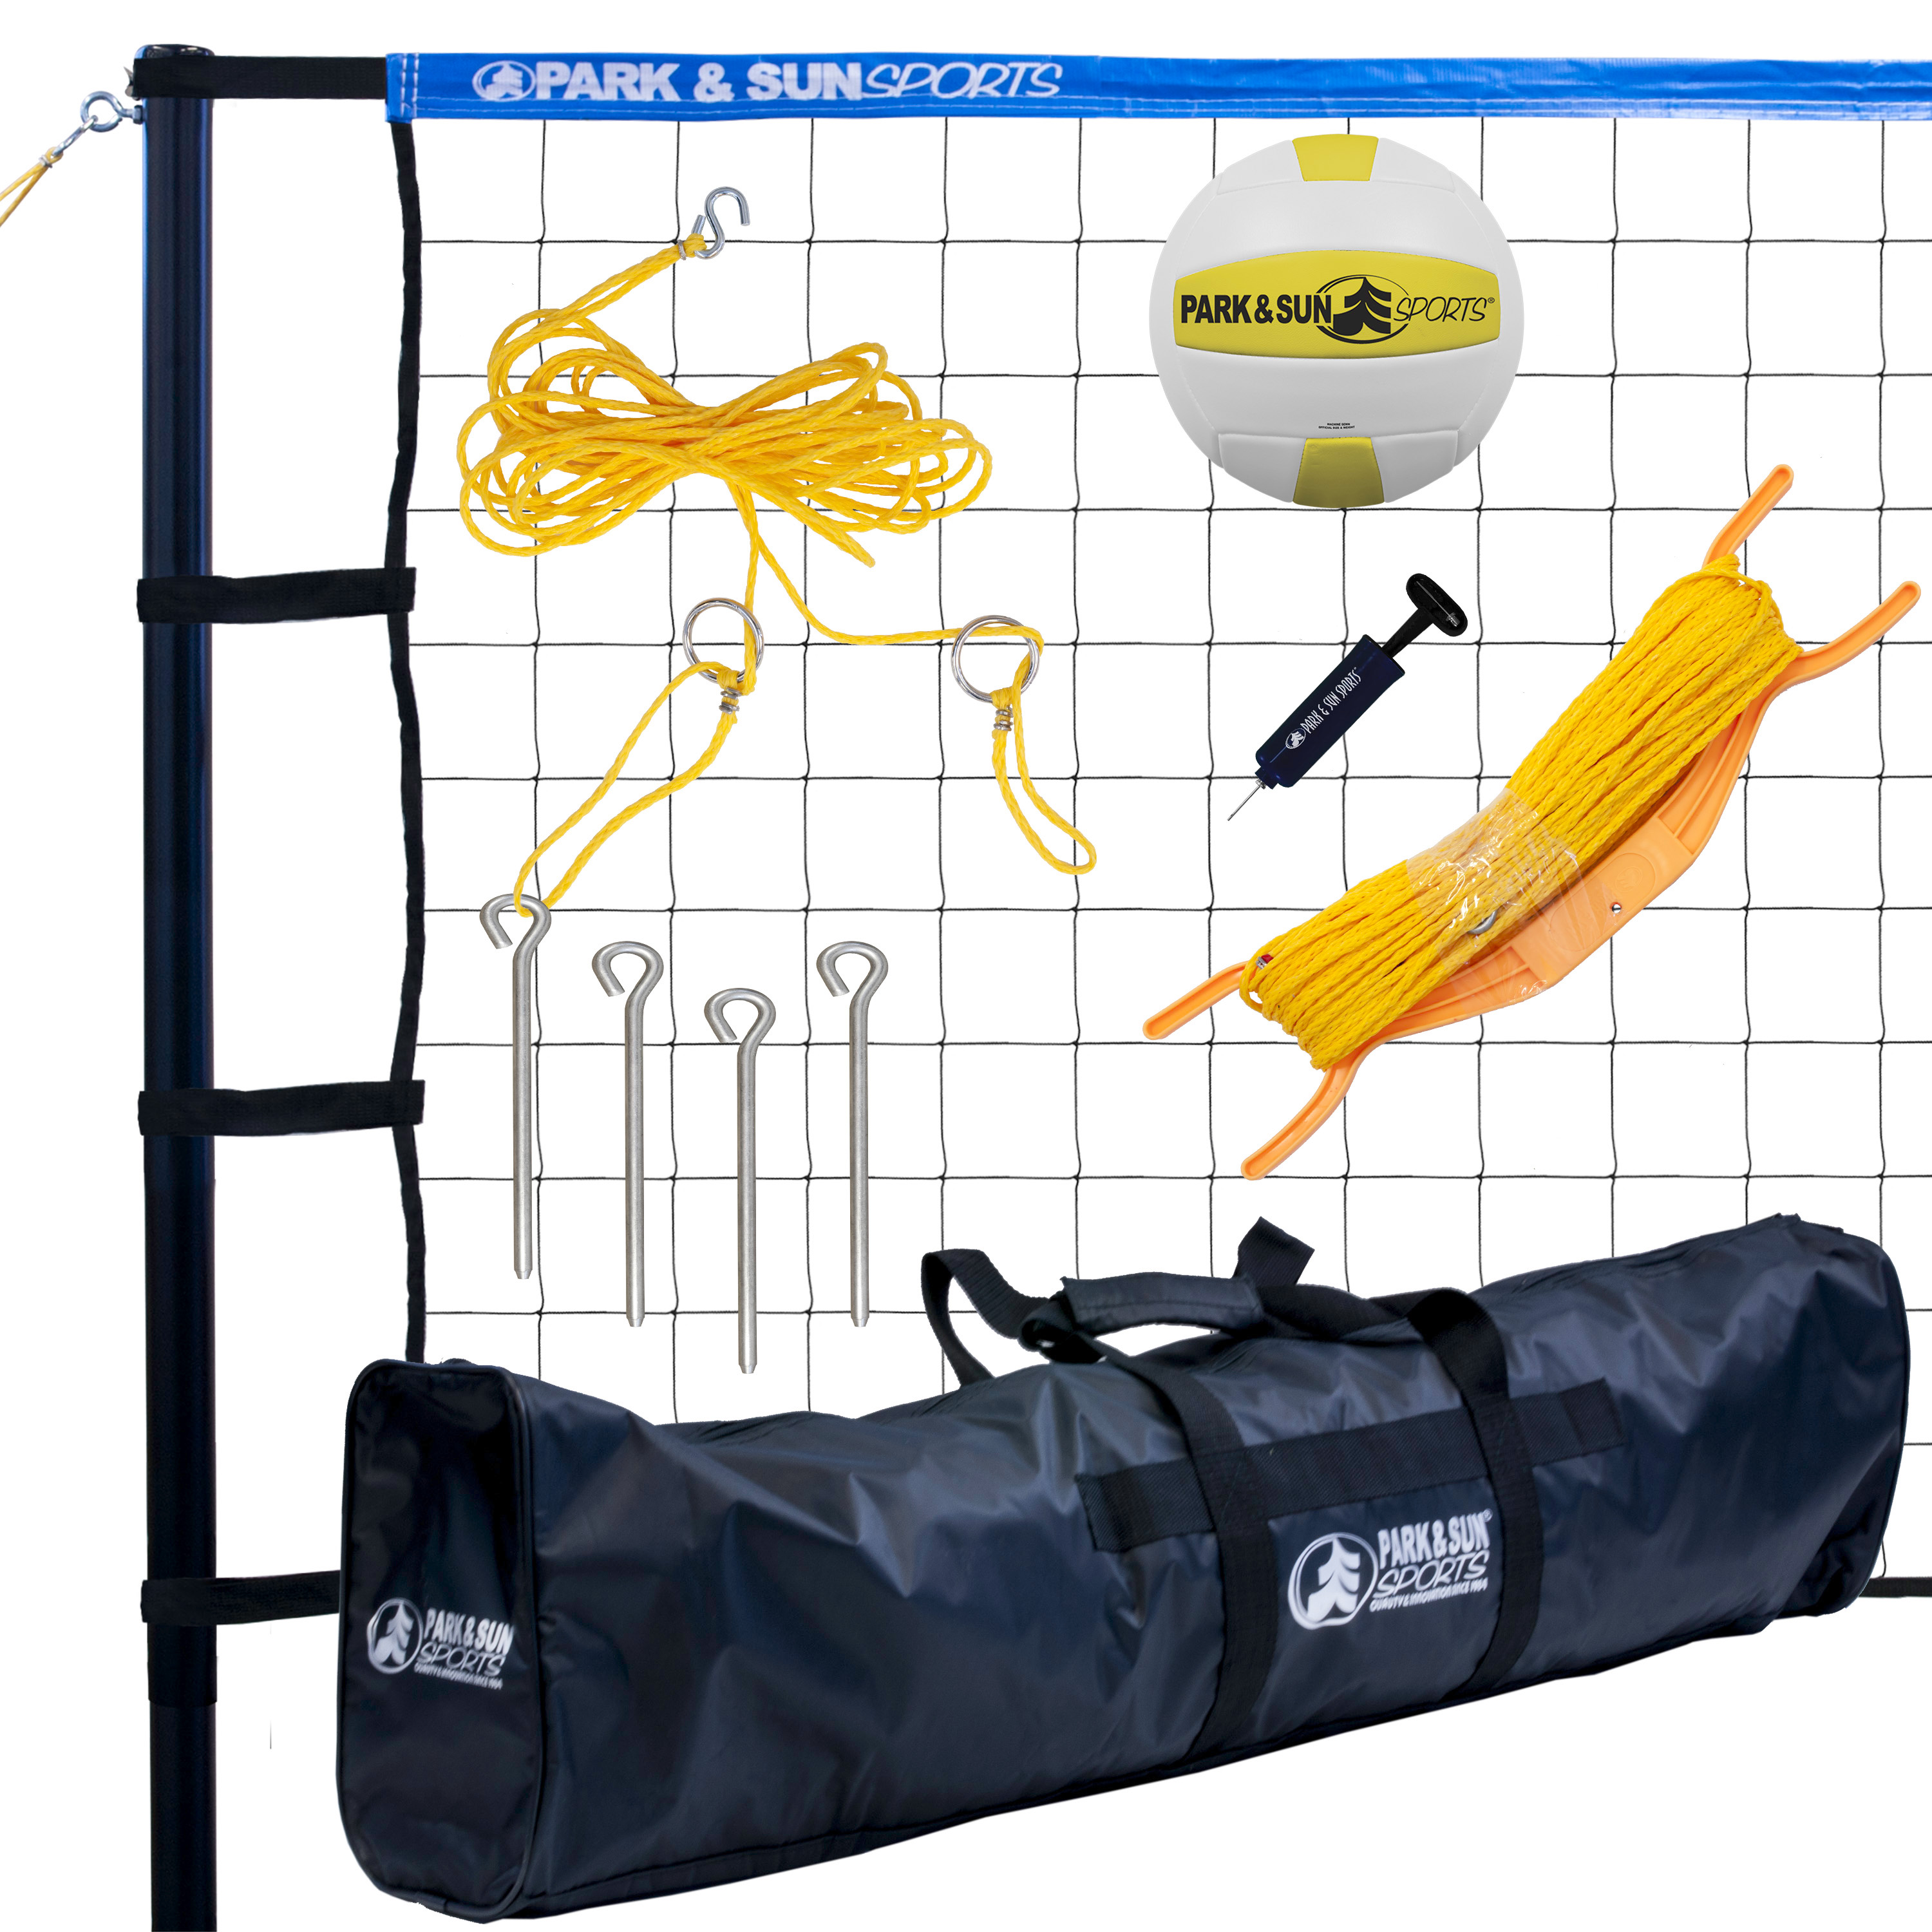 Park and Sports Blue Tournament 179 Volleyball Set Product Layout